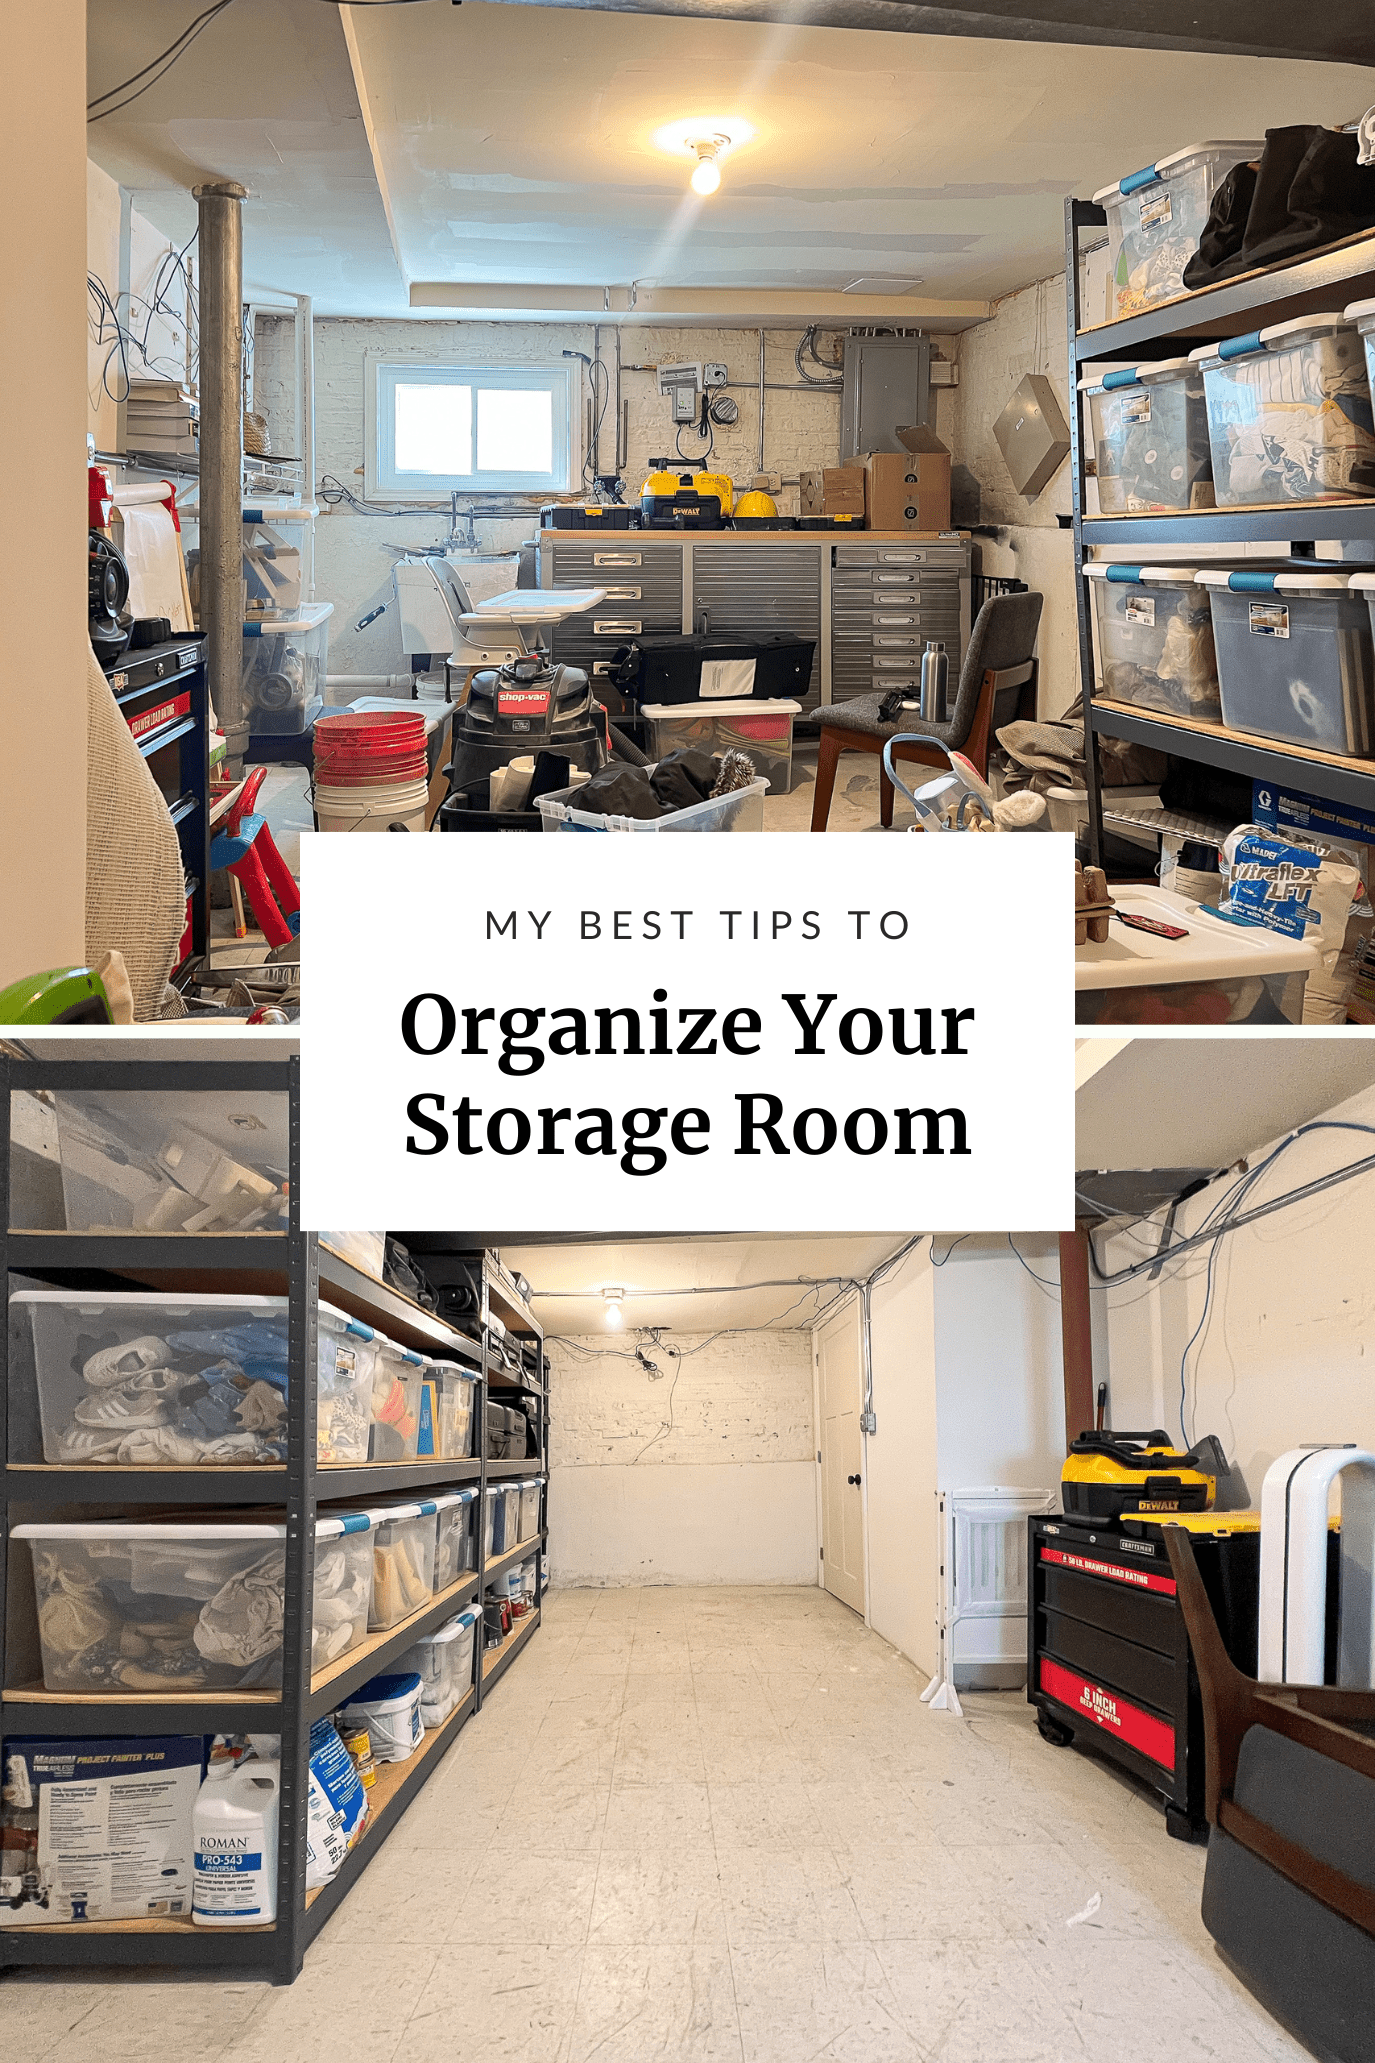 My best tips to organize your storage room